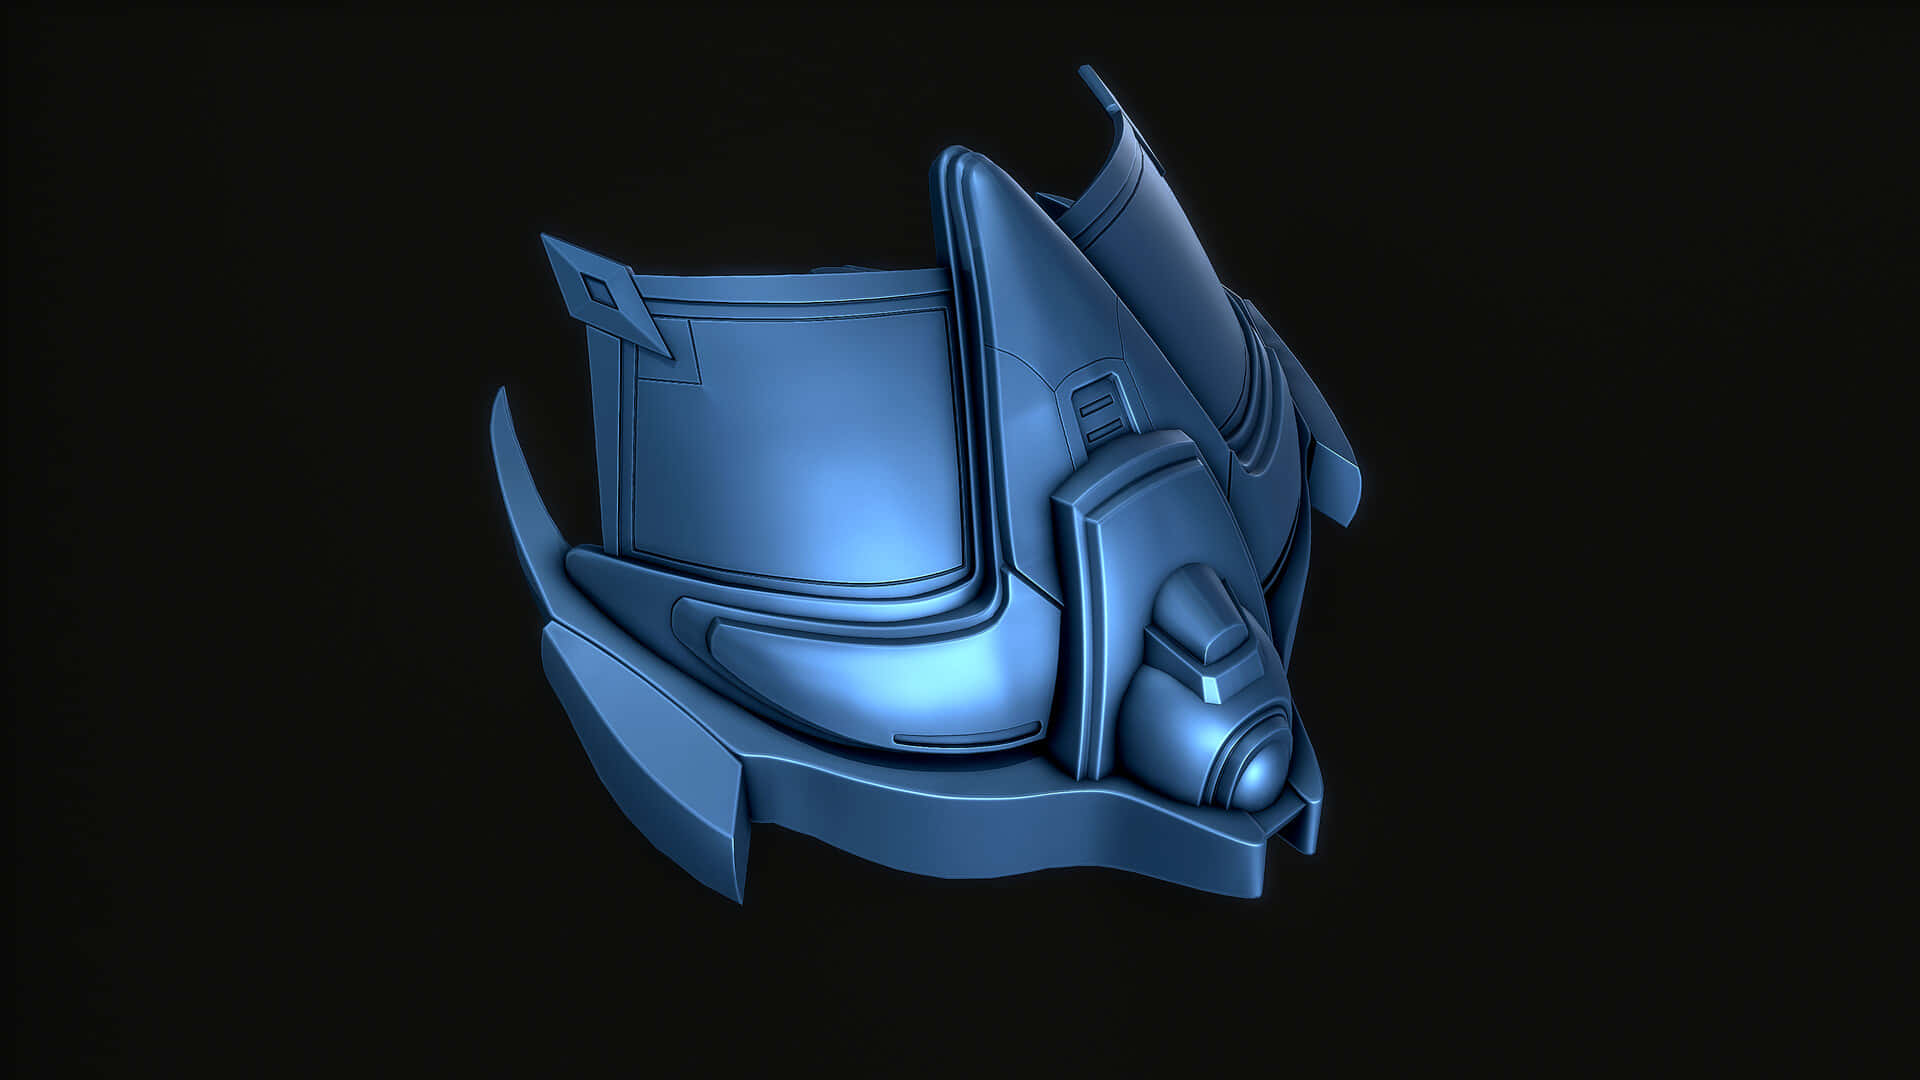 A Blue Helmet With A Blue Light On It